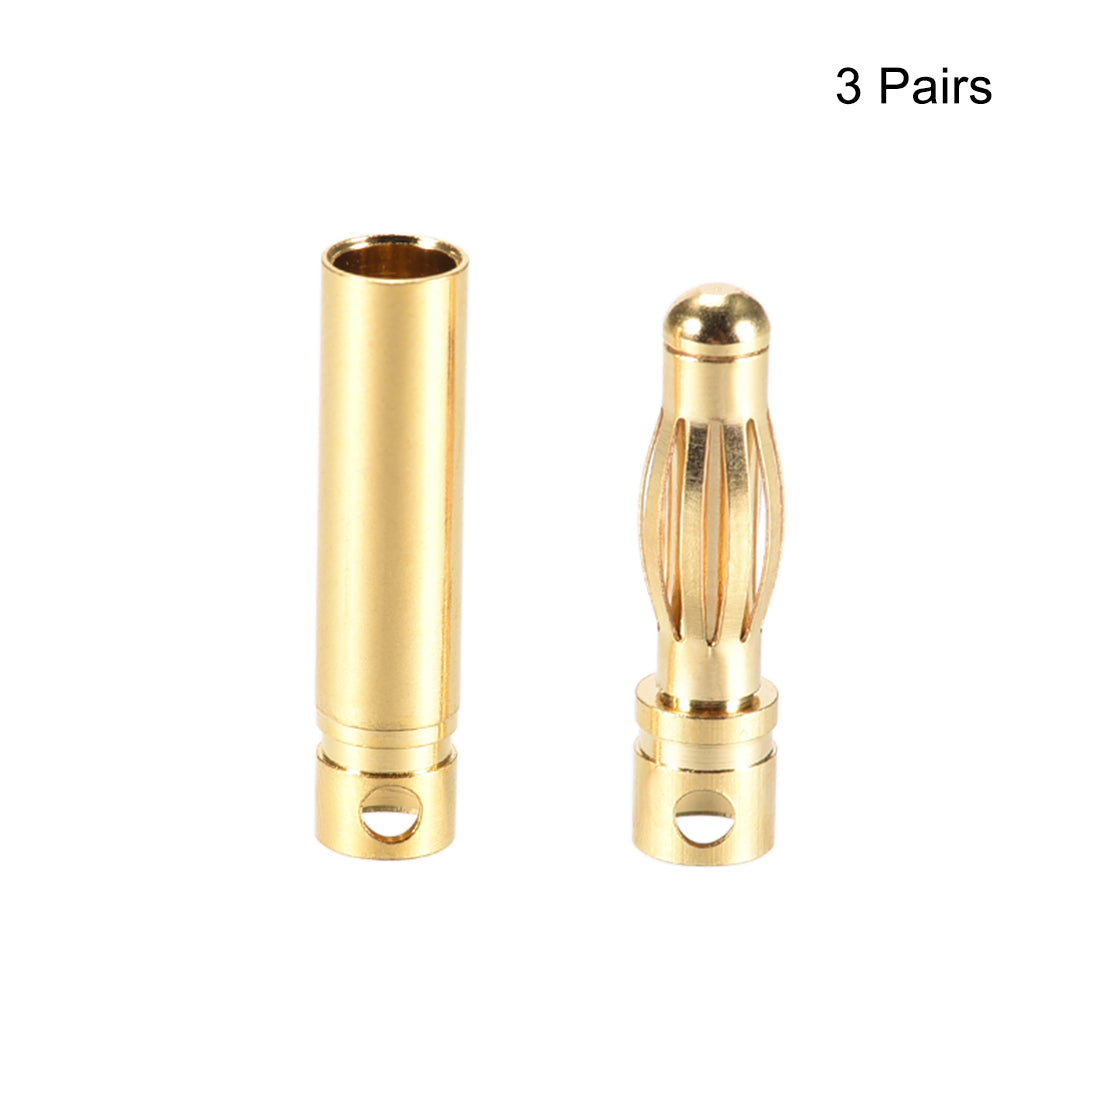 uxcell Uxcell 4mm Male and Female Banana Speaker Plug Cable Connectors Gold Tone Jack Connector 3 Pairs